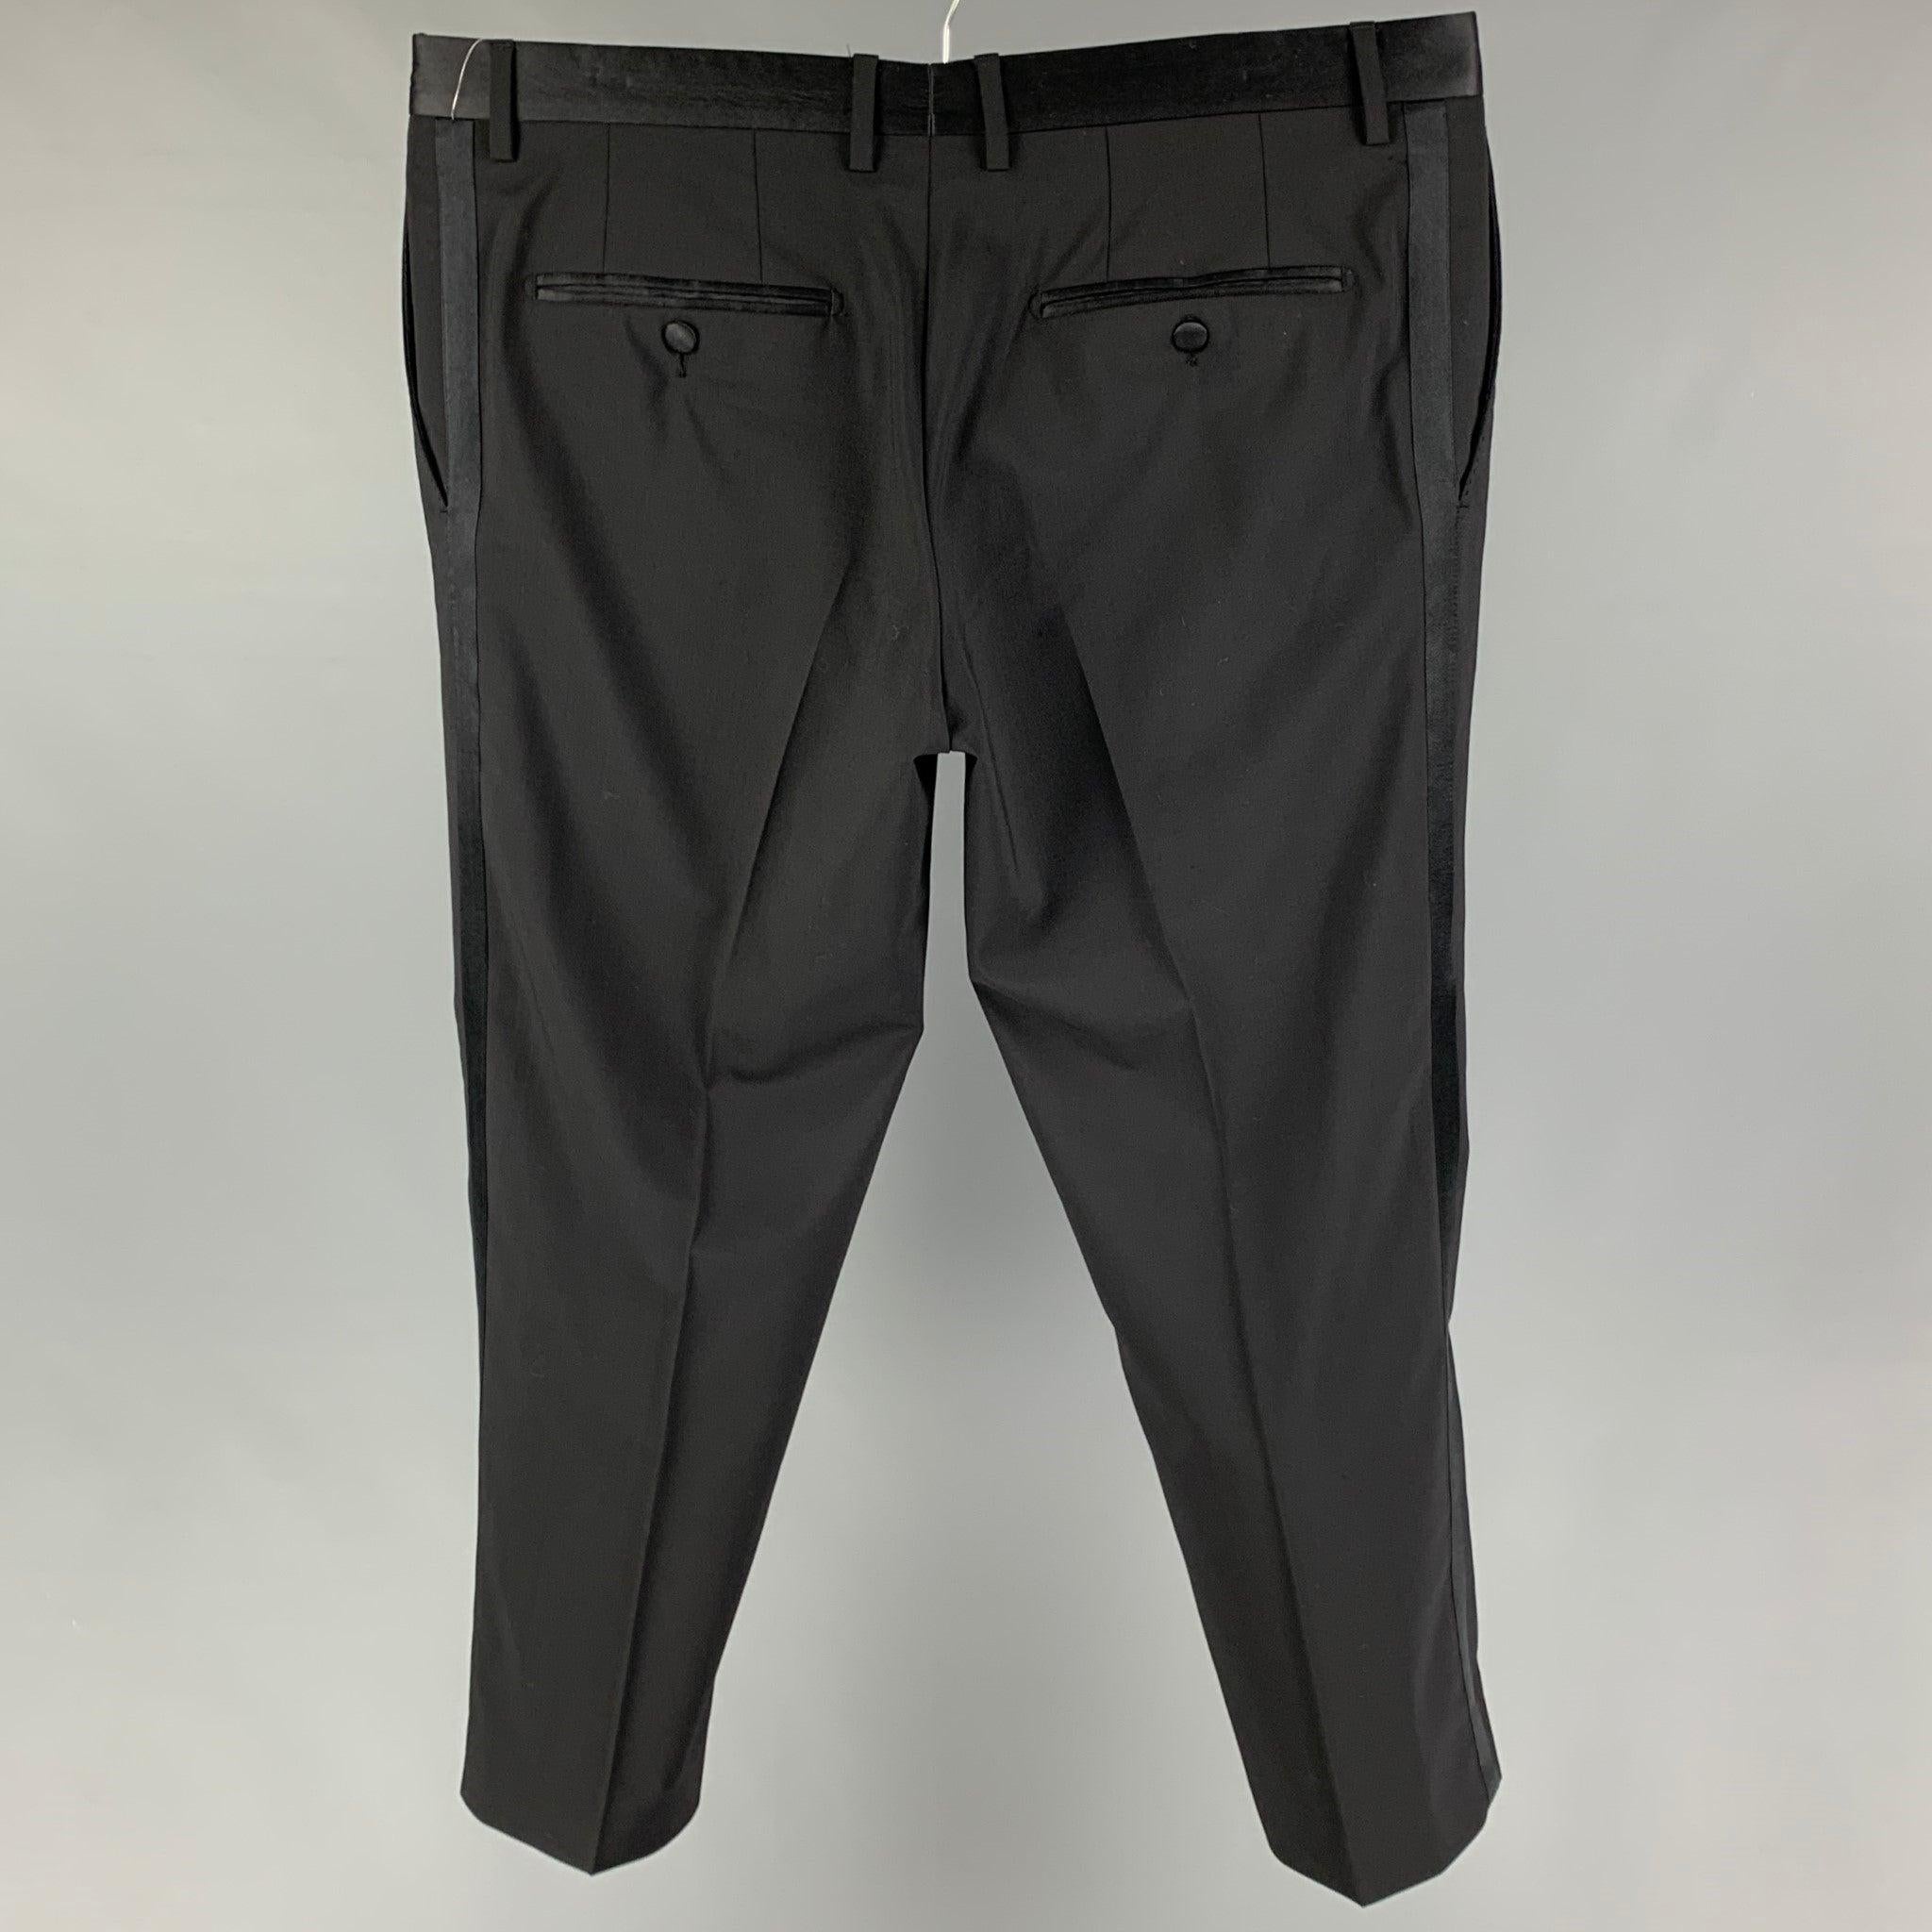 DOLCE & GABBANA Size 36 Black Wool Blend Tuxedo Dress Pants In Good Condition For Sale In San Francisco, CA